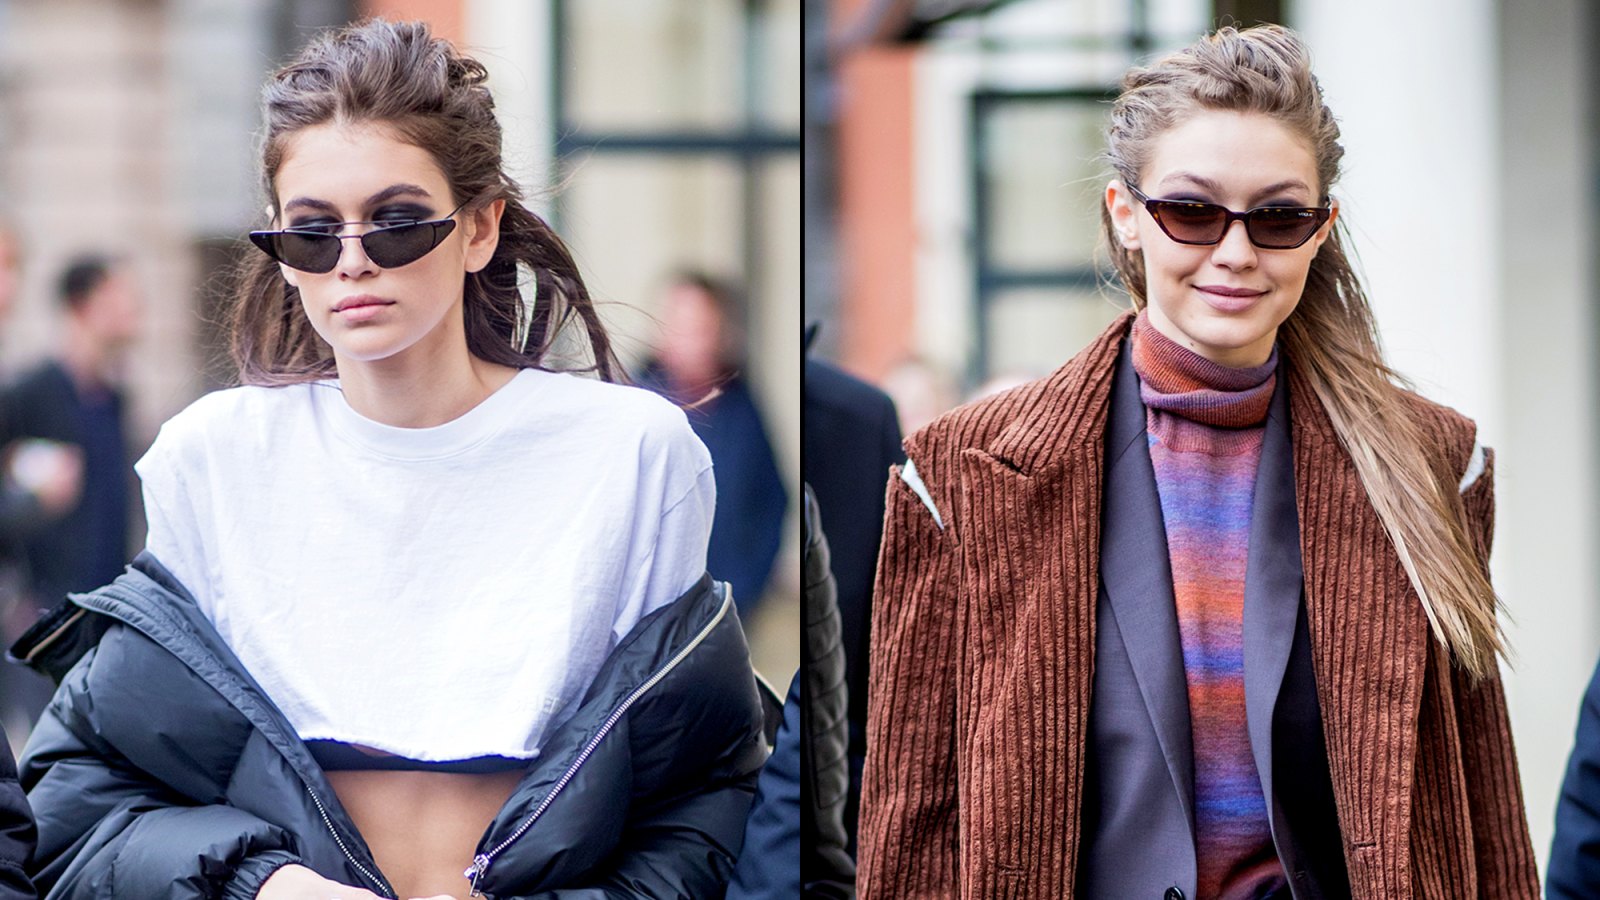 Kaia Gerber and Gigi Hadid step out during Milan Fashion Week Fall/Winter 2018/19 on February 22, 2018 in Milan, Italy.